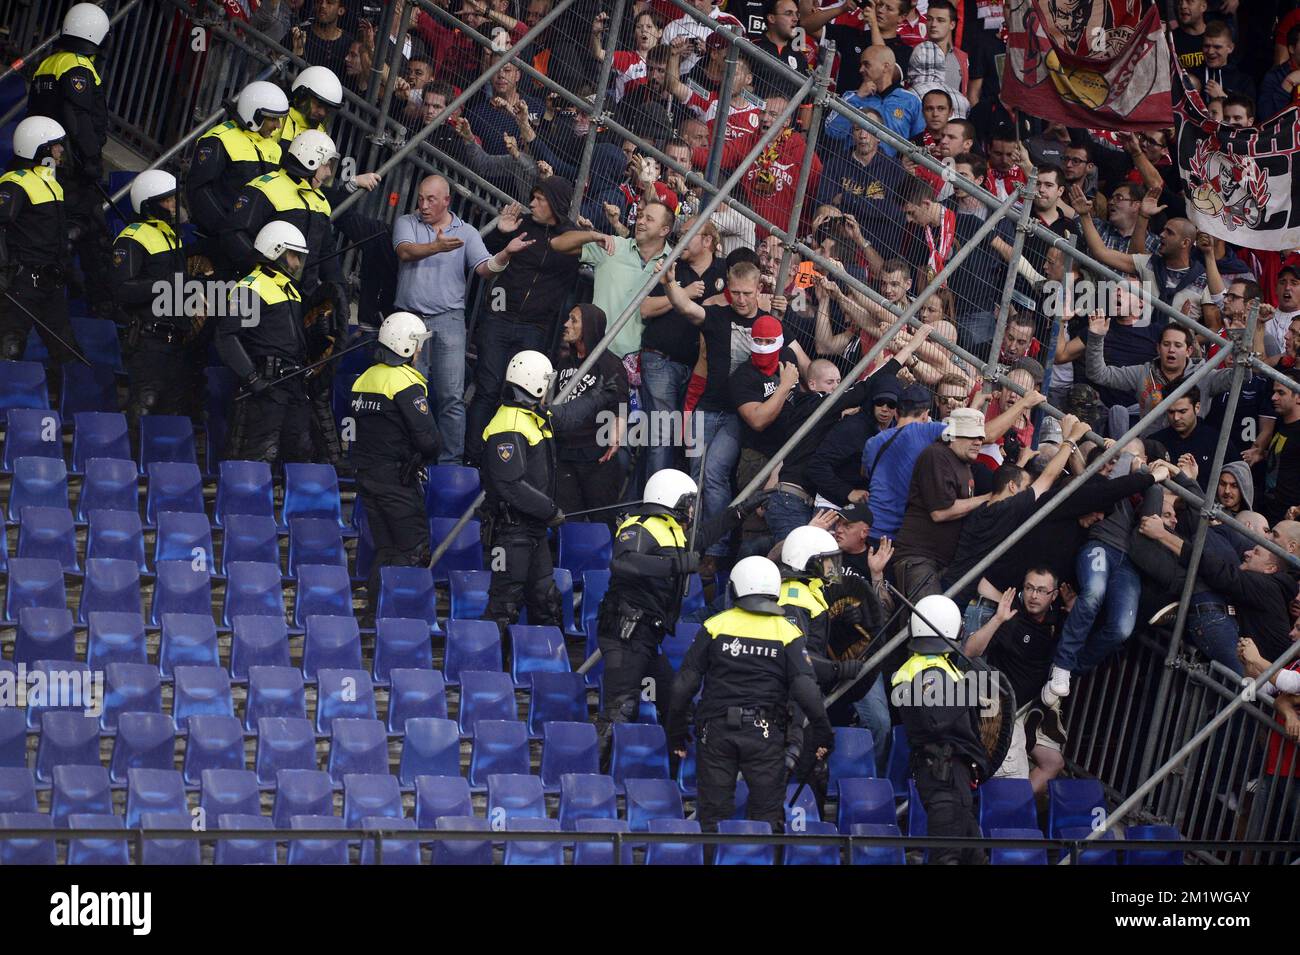 Standard's supporters fight before a soccer game between Dutch club Feyenoord Rotterdam and Belgian first division team Standard de Liege, in the 'De Kuip' stadium in Rotterdam, Netherlands, Thursday 02 October 2014, the second game in the group stage of the UEFA Europa League, in group G. Stock Photo